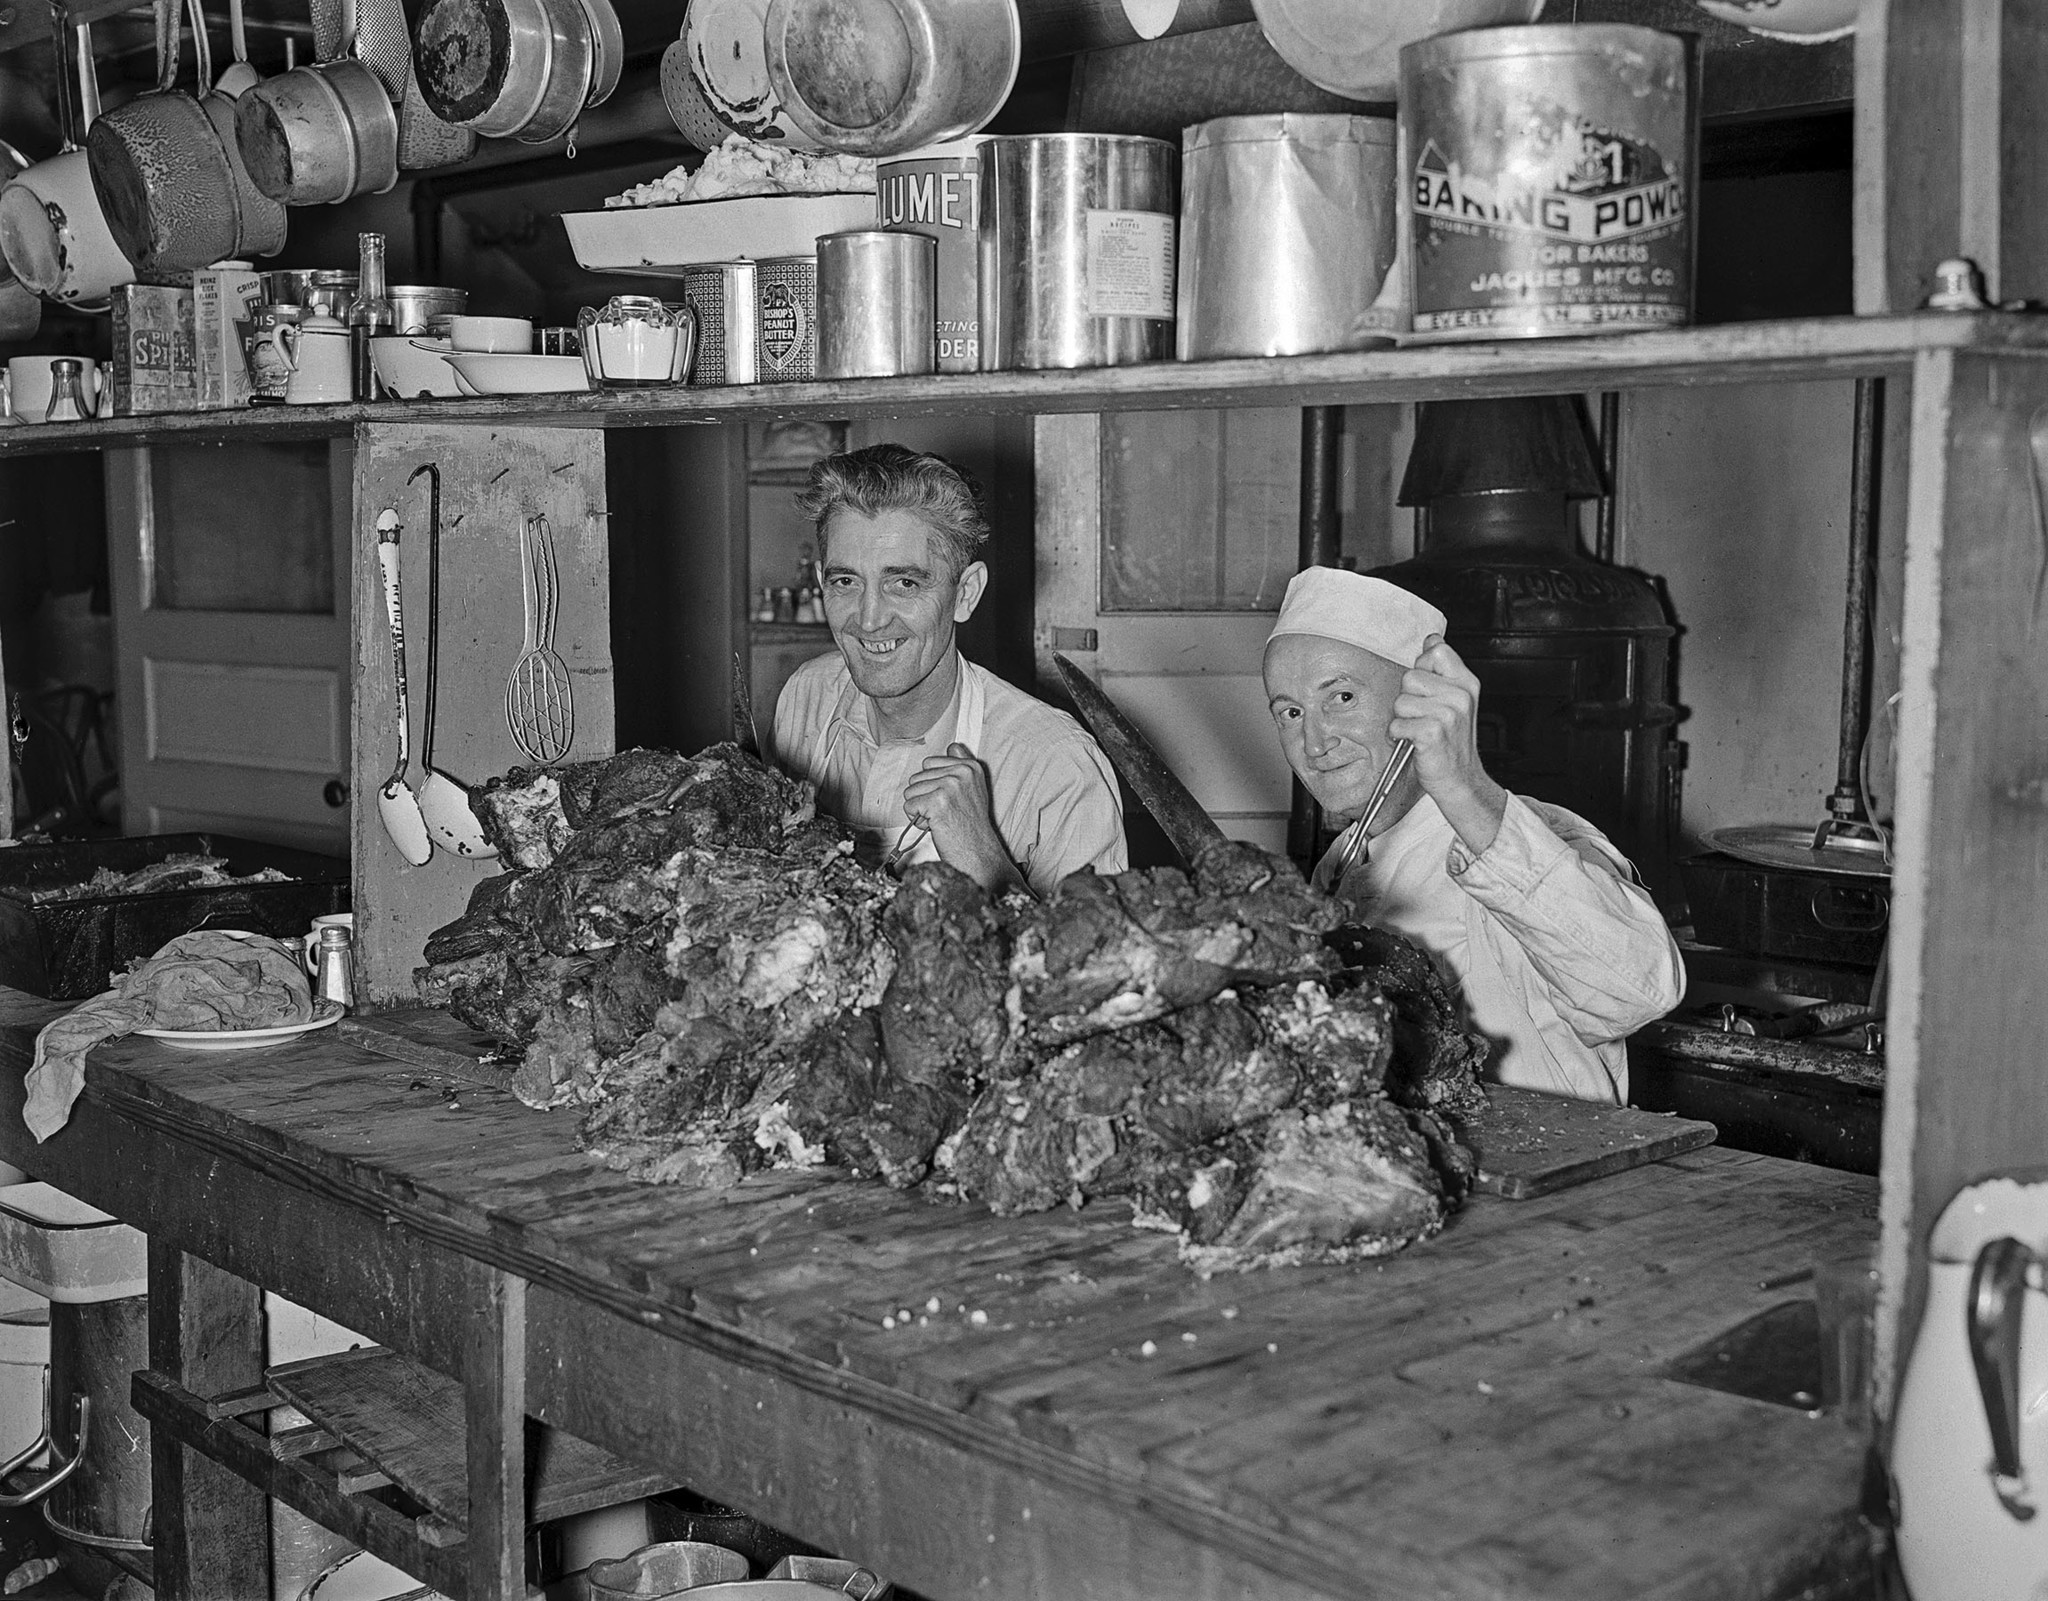 Nov. 26, 1936: Bob Boyd and Chef George Arnold in a kitchen cutting beef for Thanksgiving dinner at